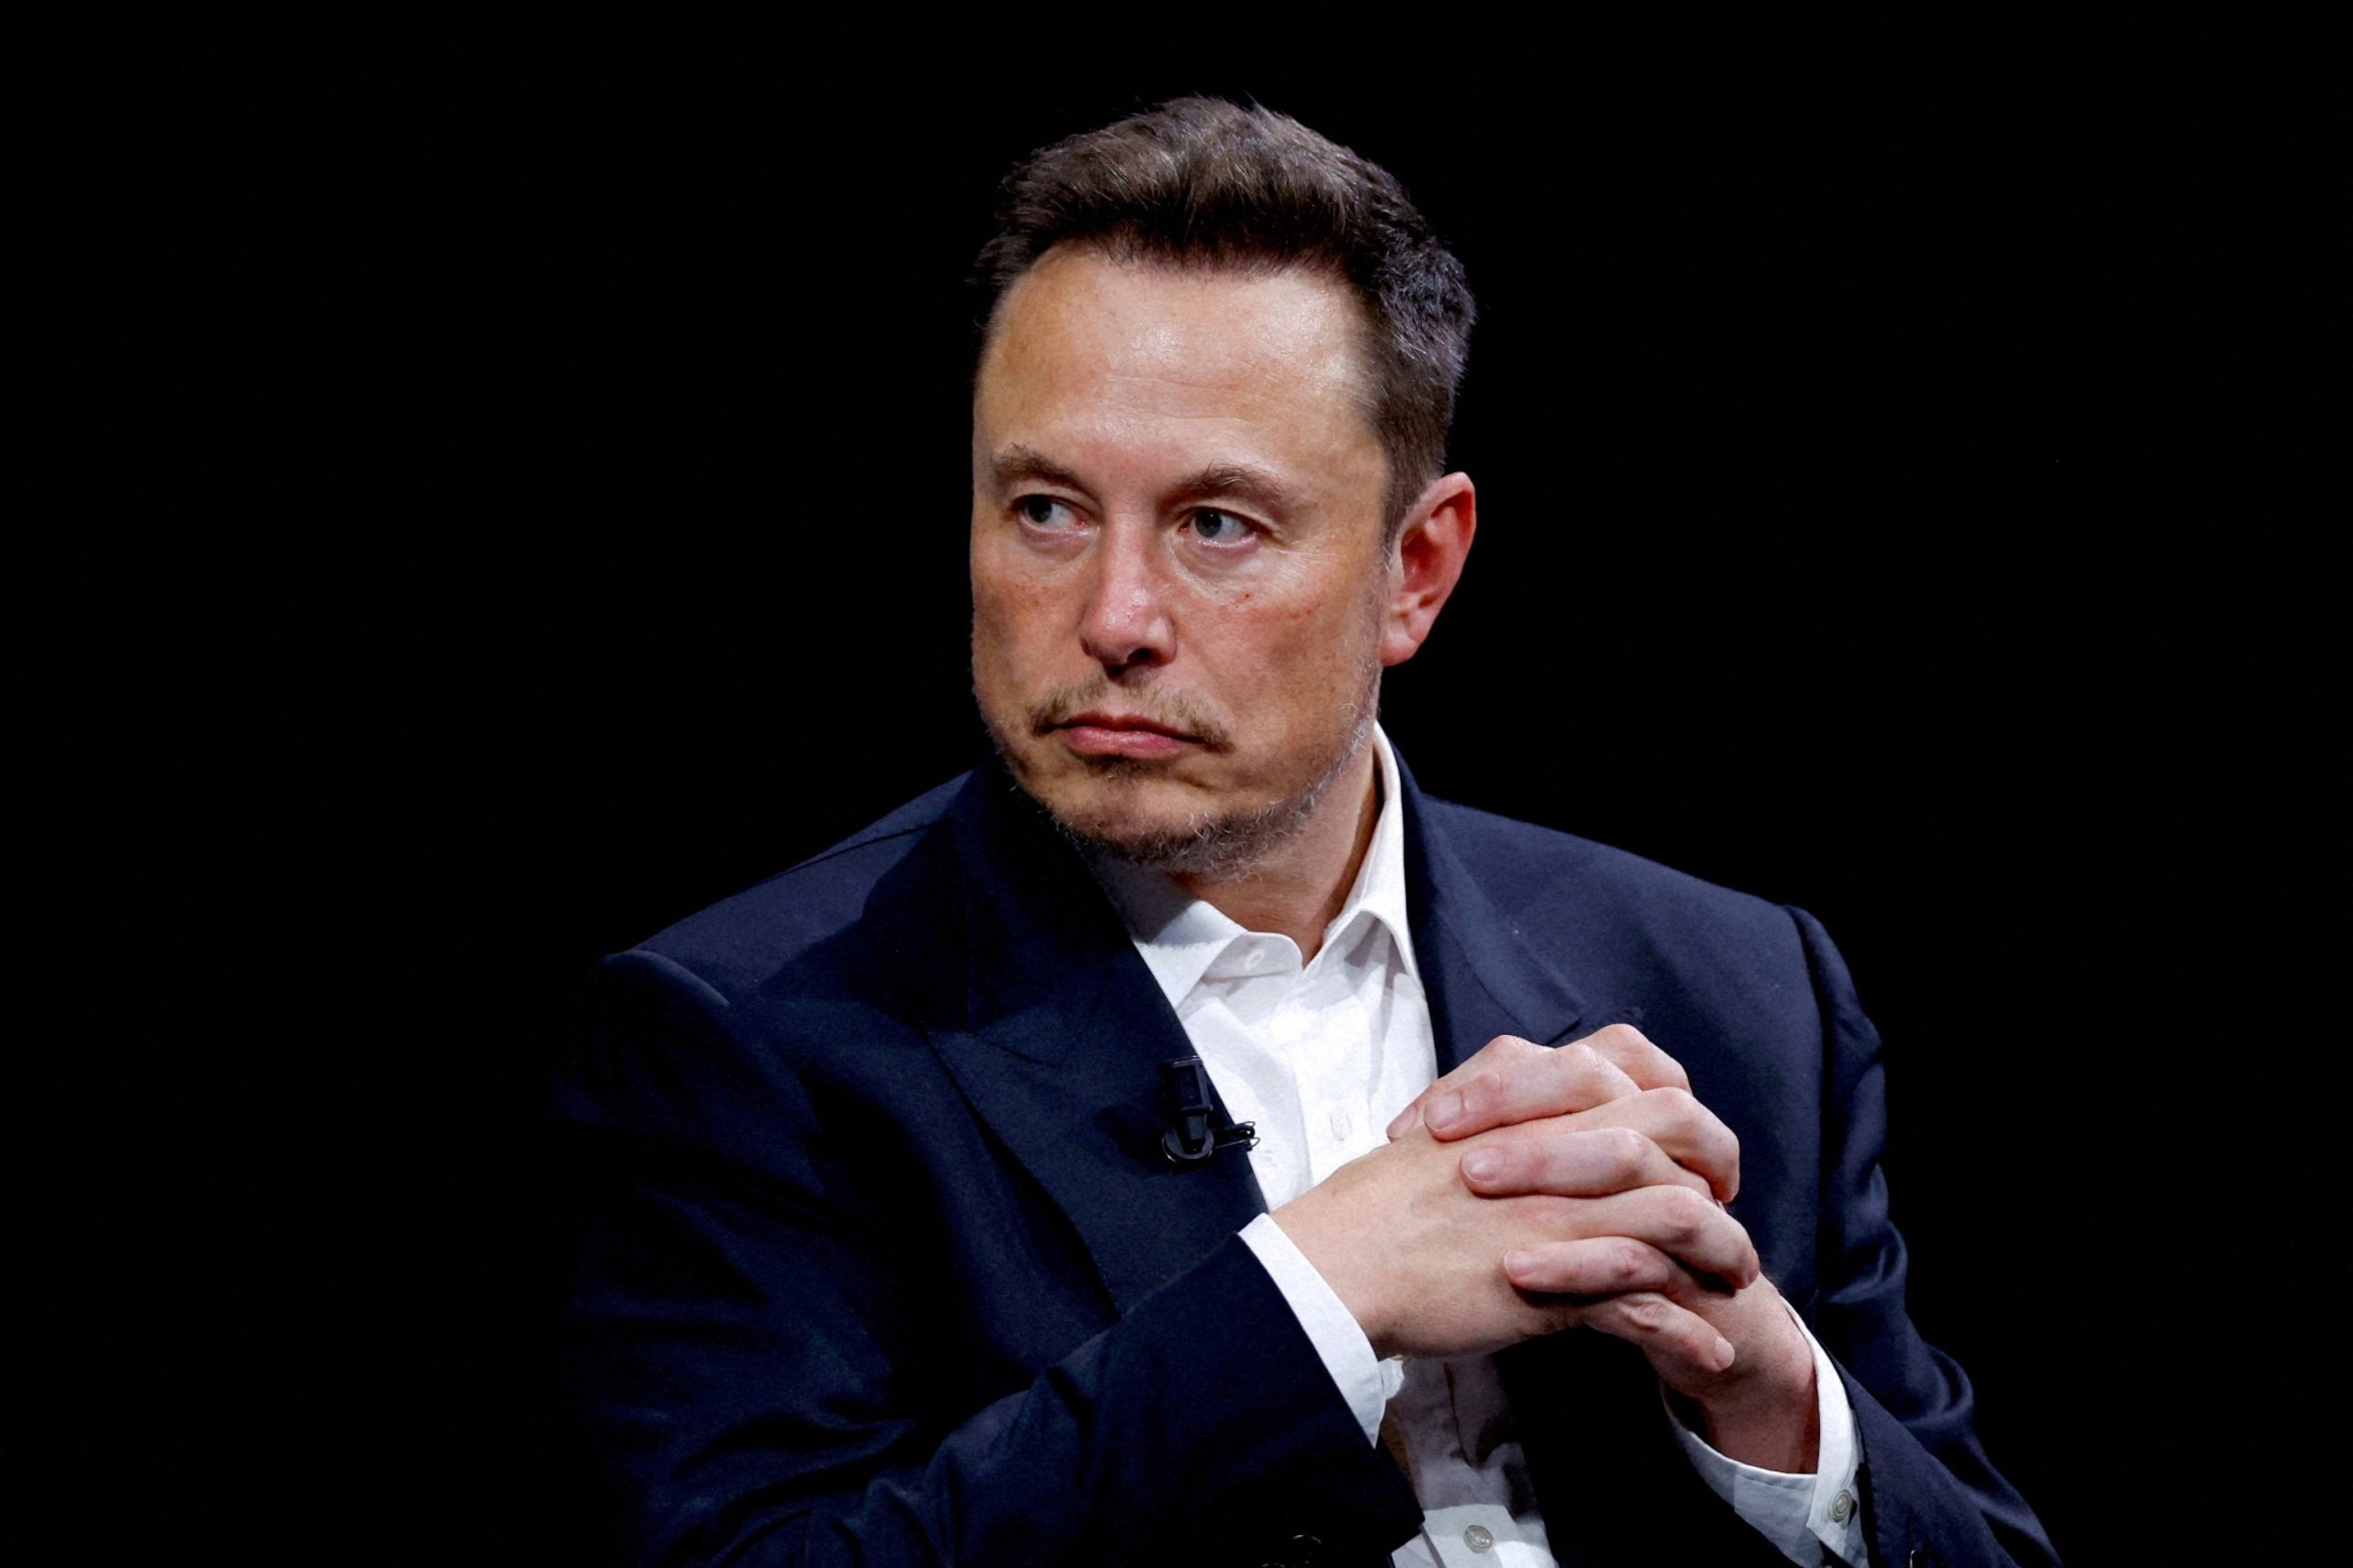 Tesla stock experiences significant decline of over 10% following failure to meet earnings expectations